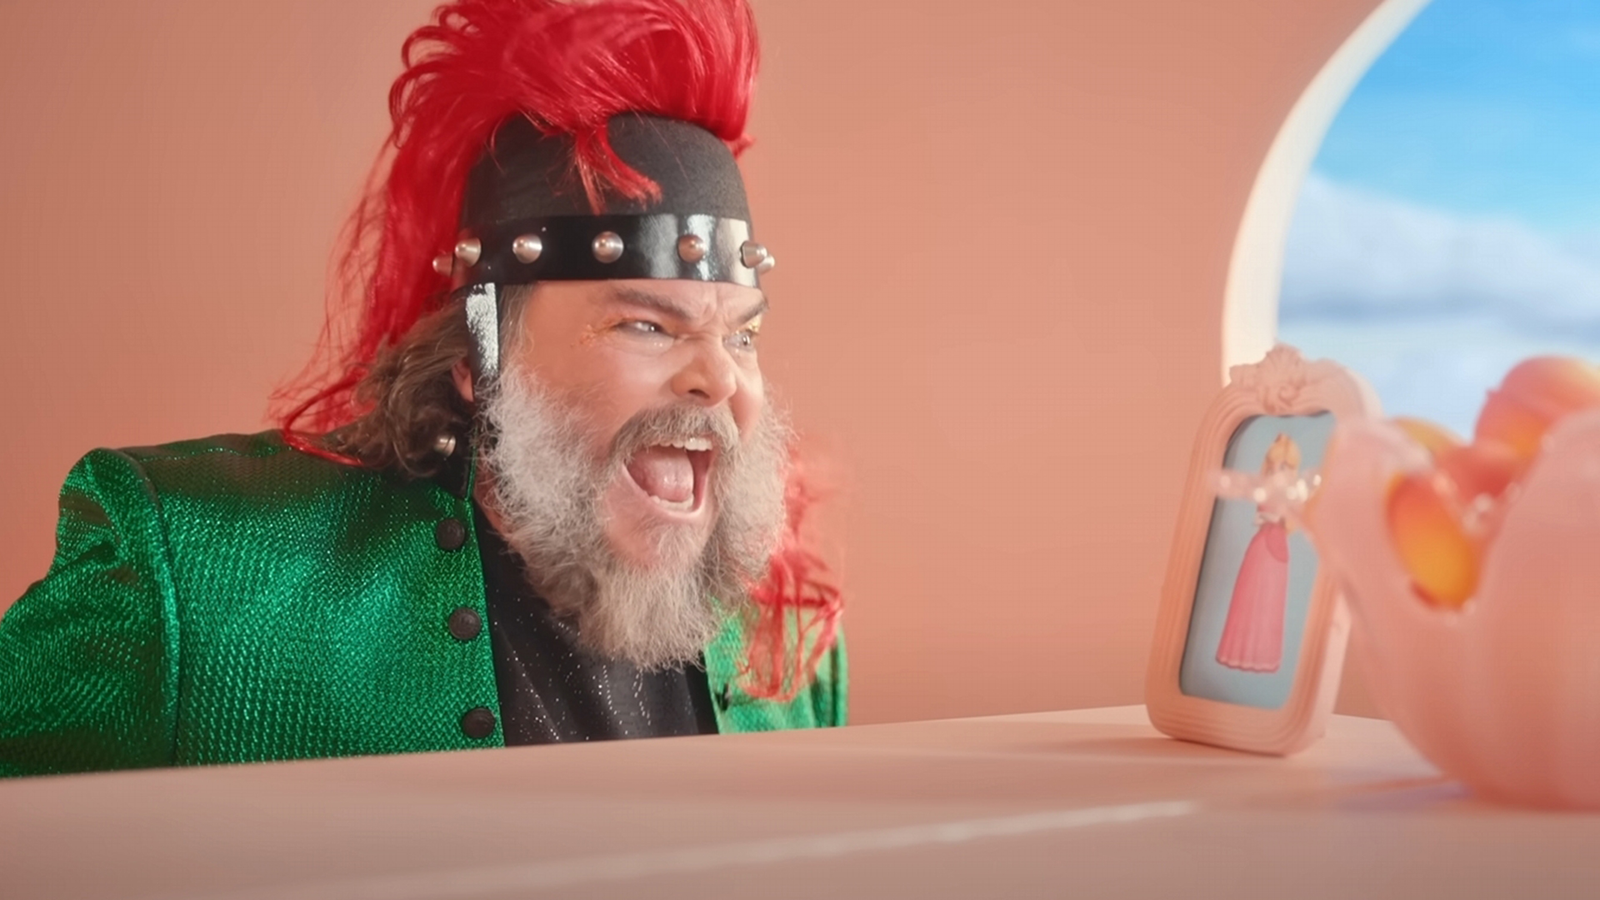 Jack Black's Bowser performance in the Mario movie was inspired by